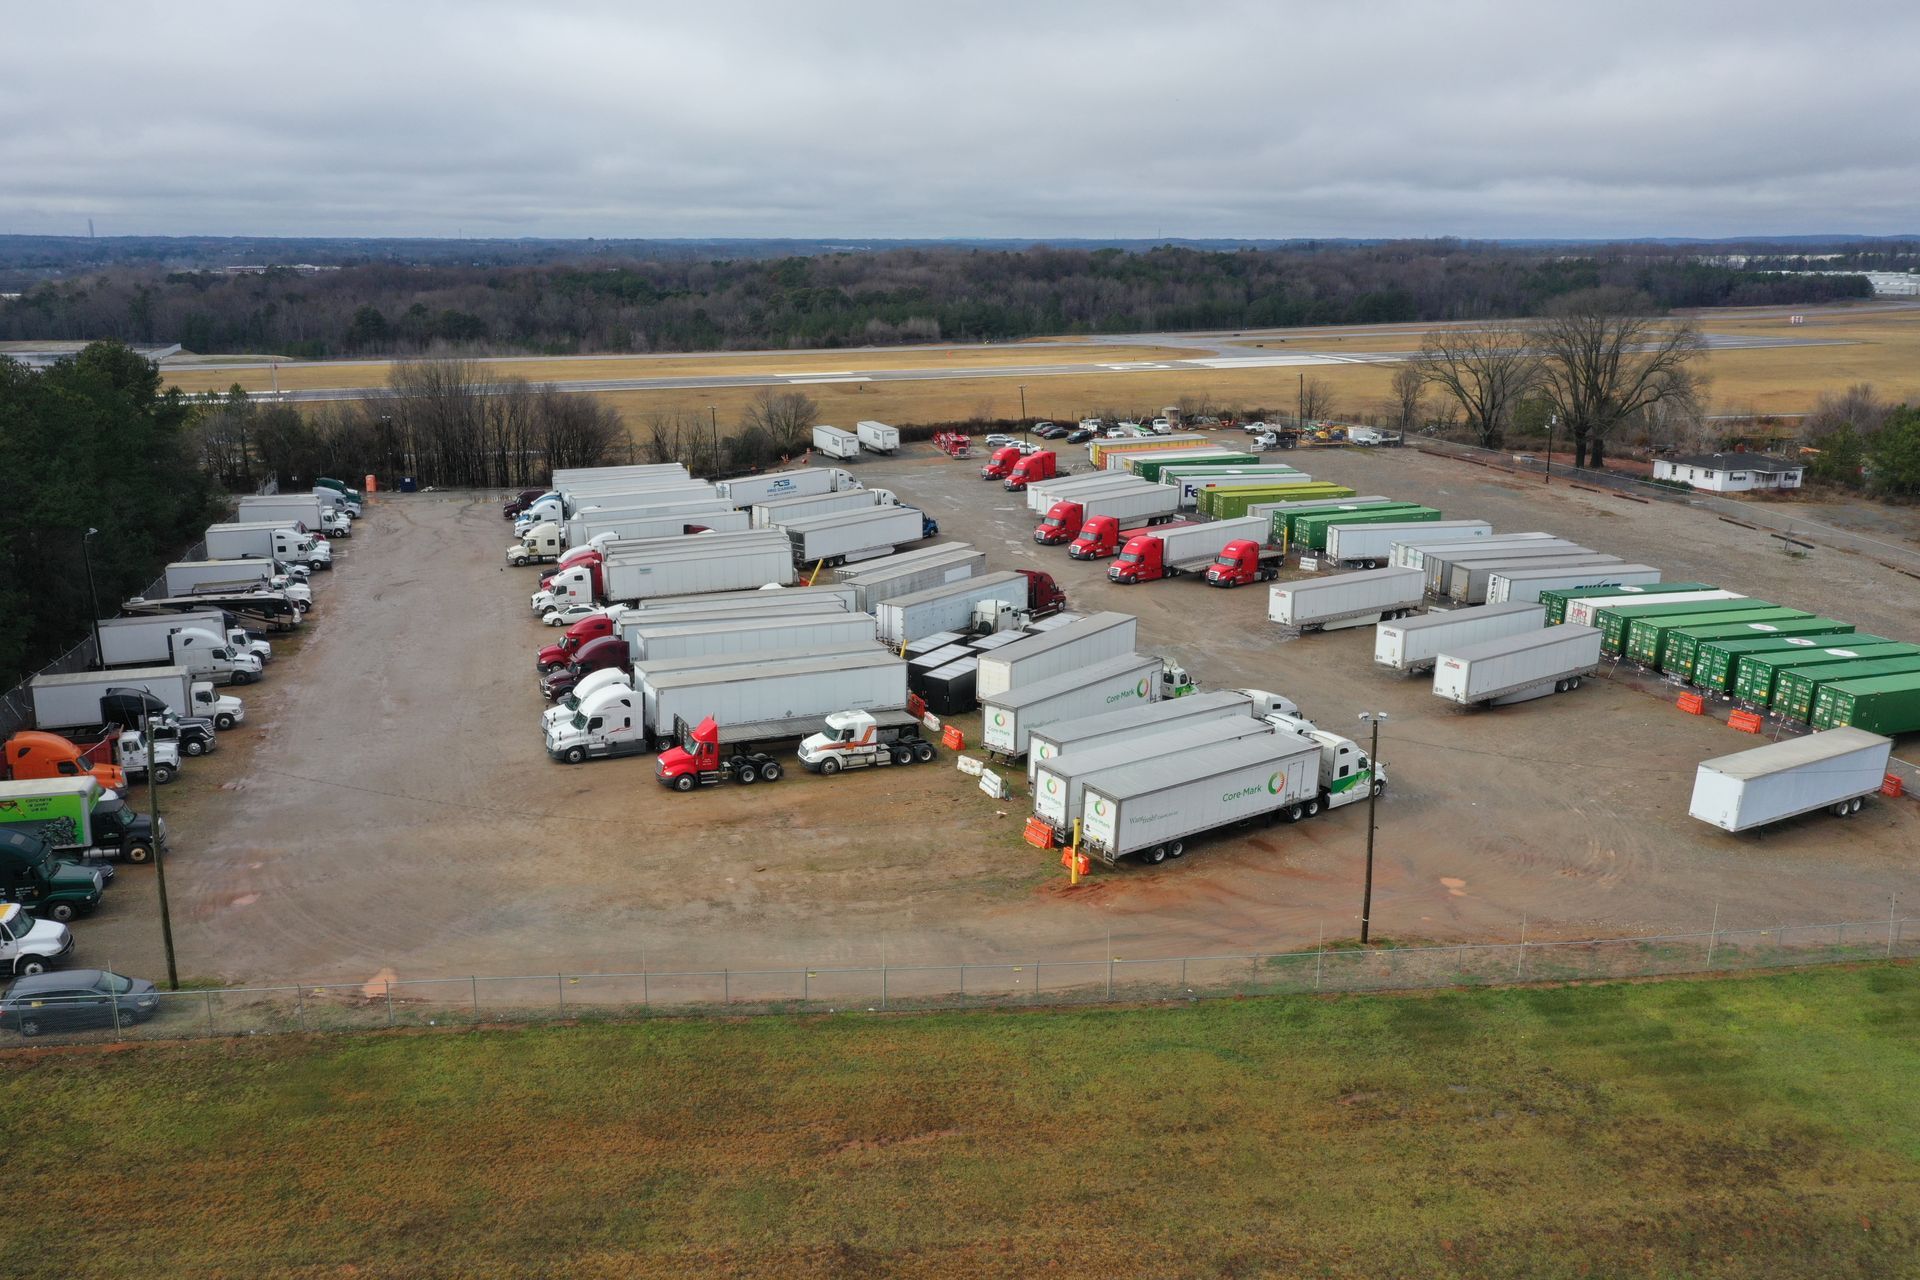 An aerial view of a large parking lot filled with trucks and trailers.